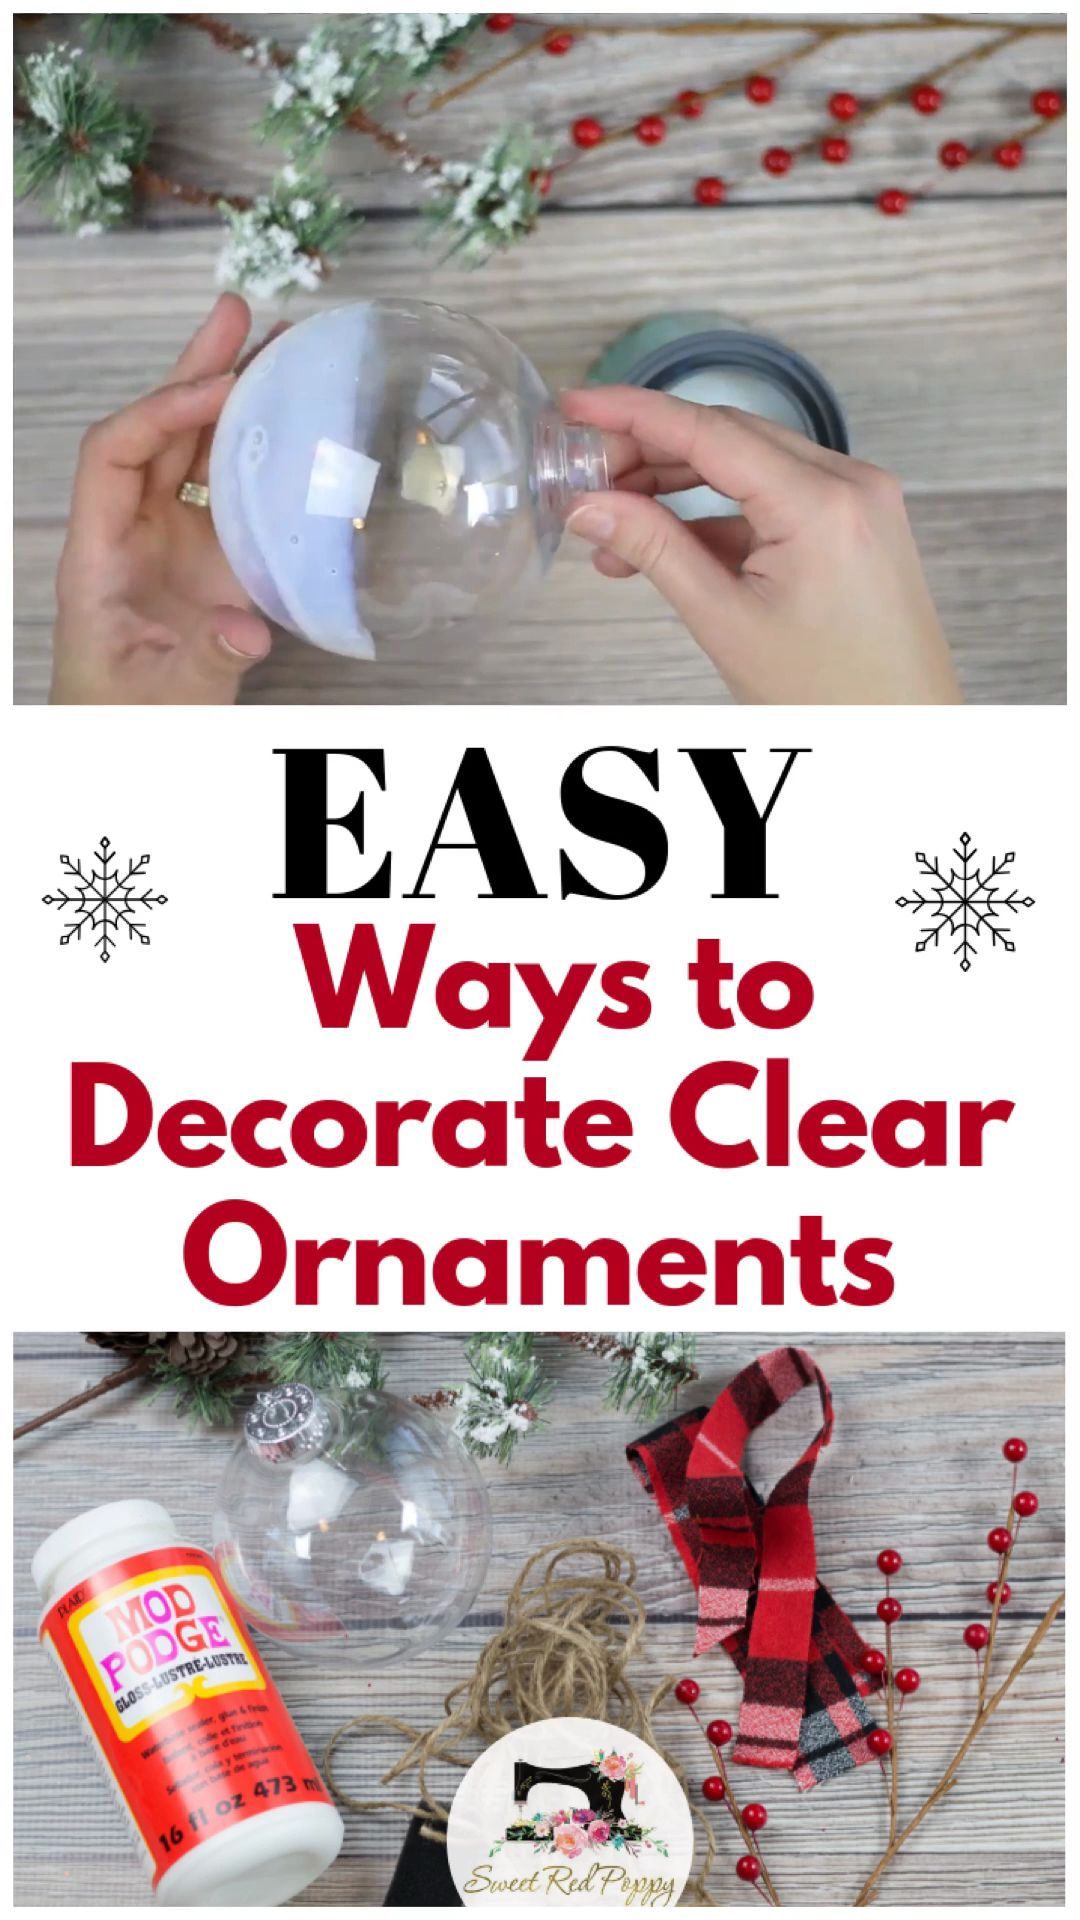 Easy Ways to Decorate Clear Plastic Ornaments for Christmas - Sweet Red Poppy - Easy Ways to Decorate Clear Plastic Ornaments for Christmas - Sweet Red Poppy -   19 diy Easy christmas ideas